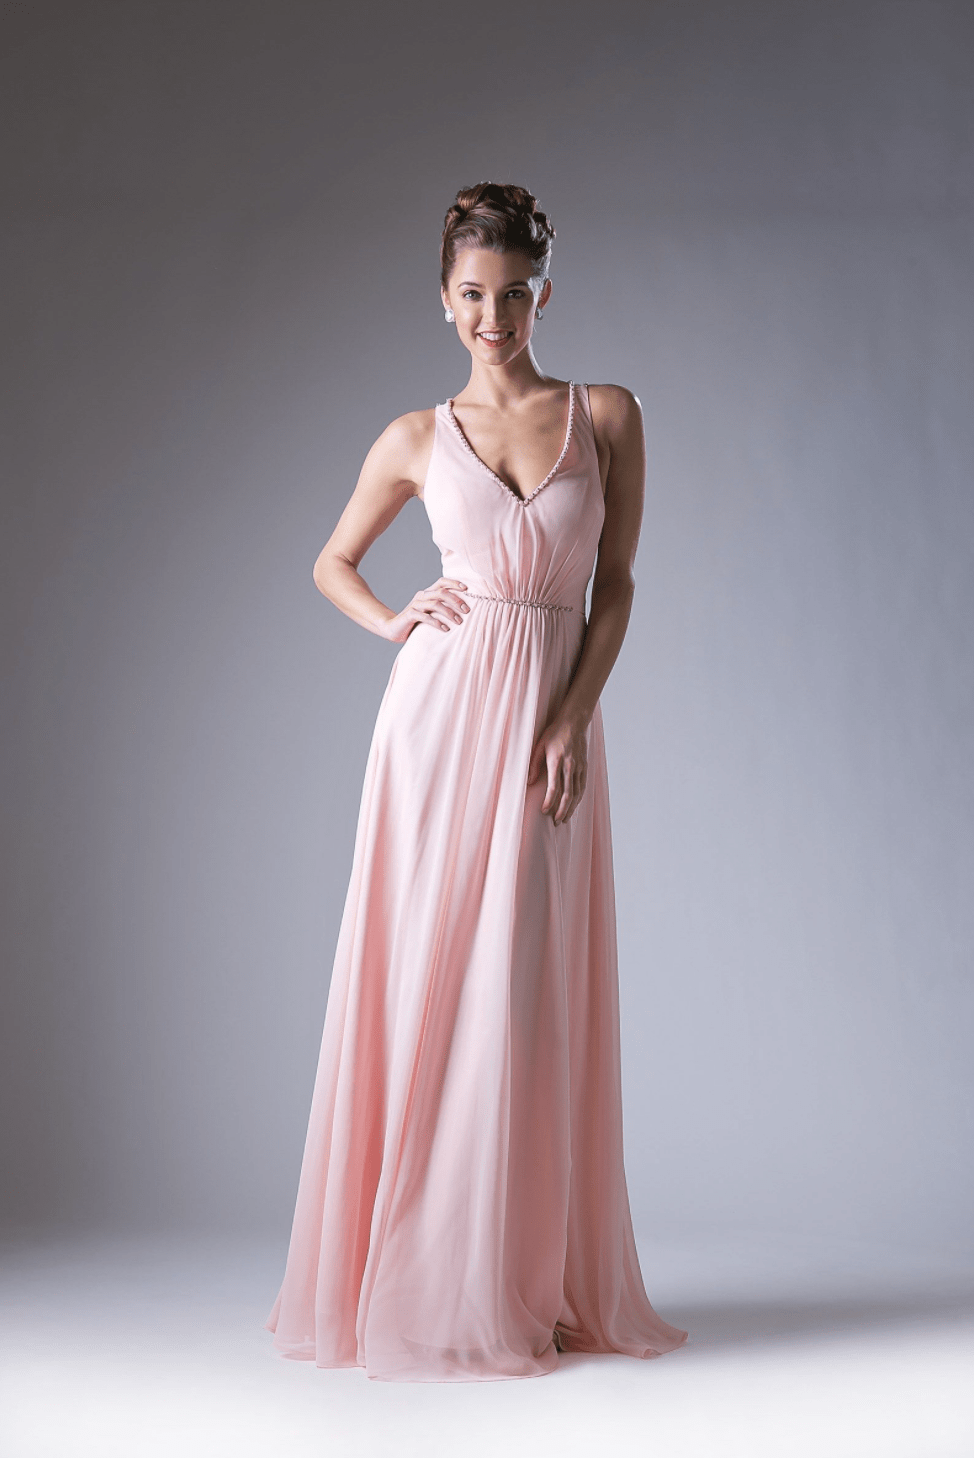 Embroidered V Neck Chiffon Dress - NORMA REED